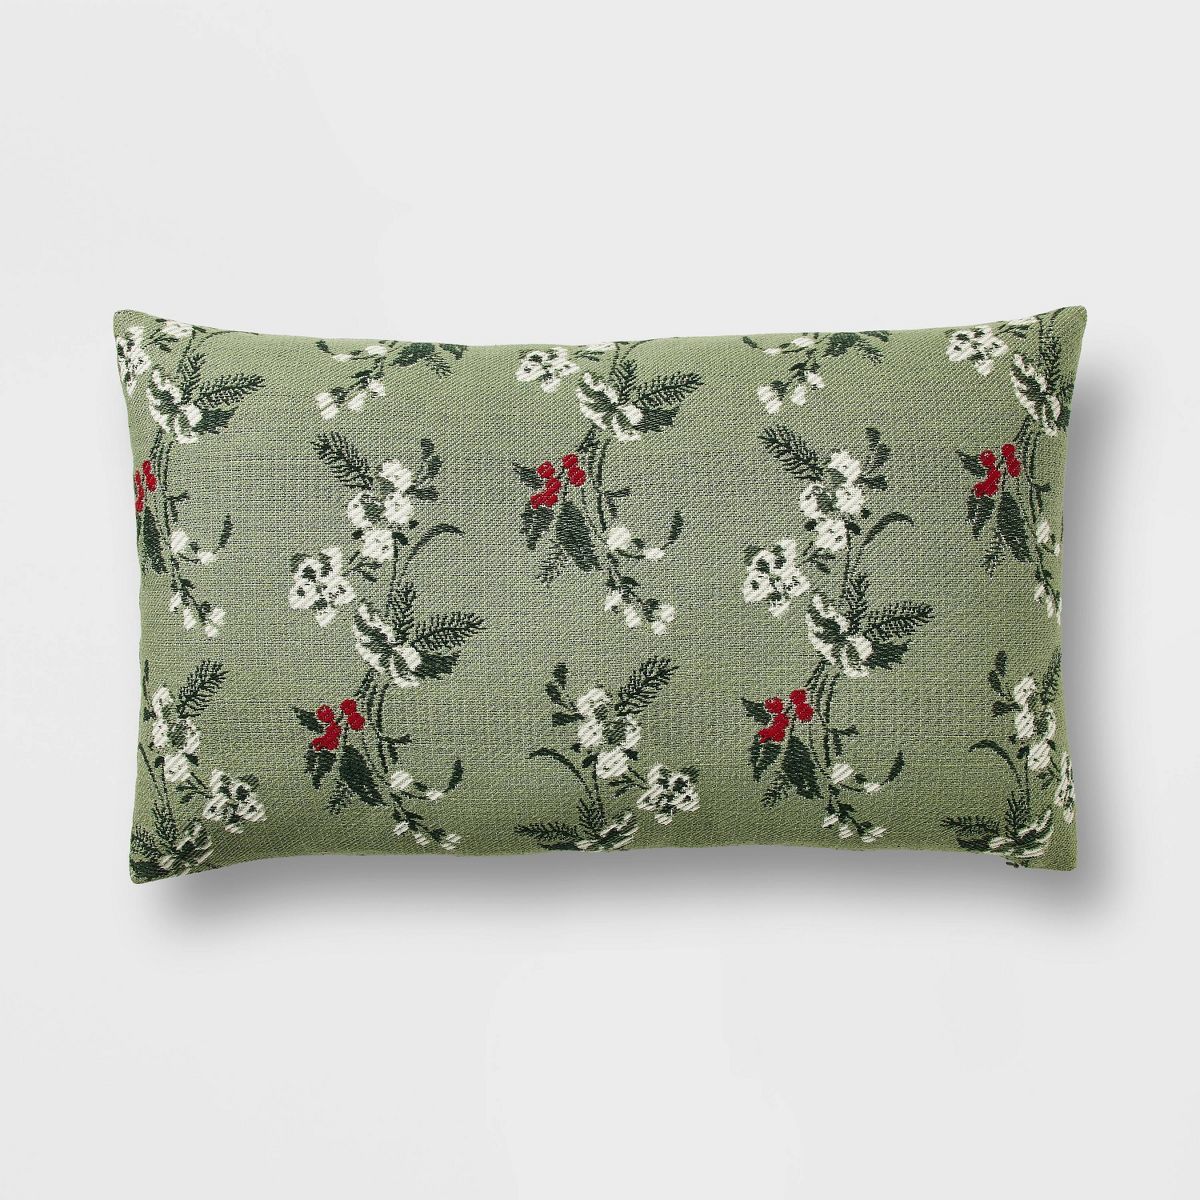 Oversized Printed Floral Lumbar Throw Pillow - Threshold™ designed with Studio McGee | Target